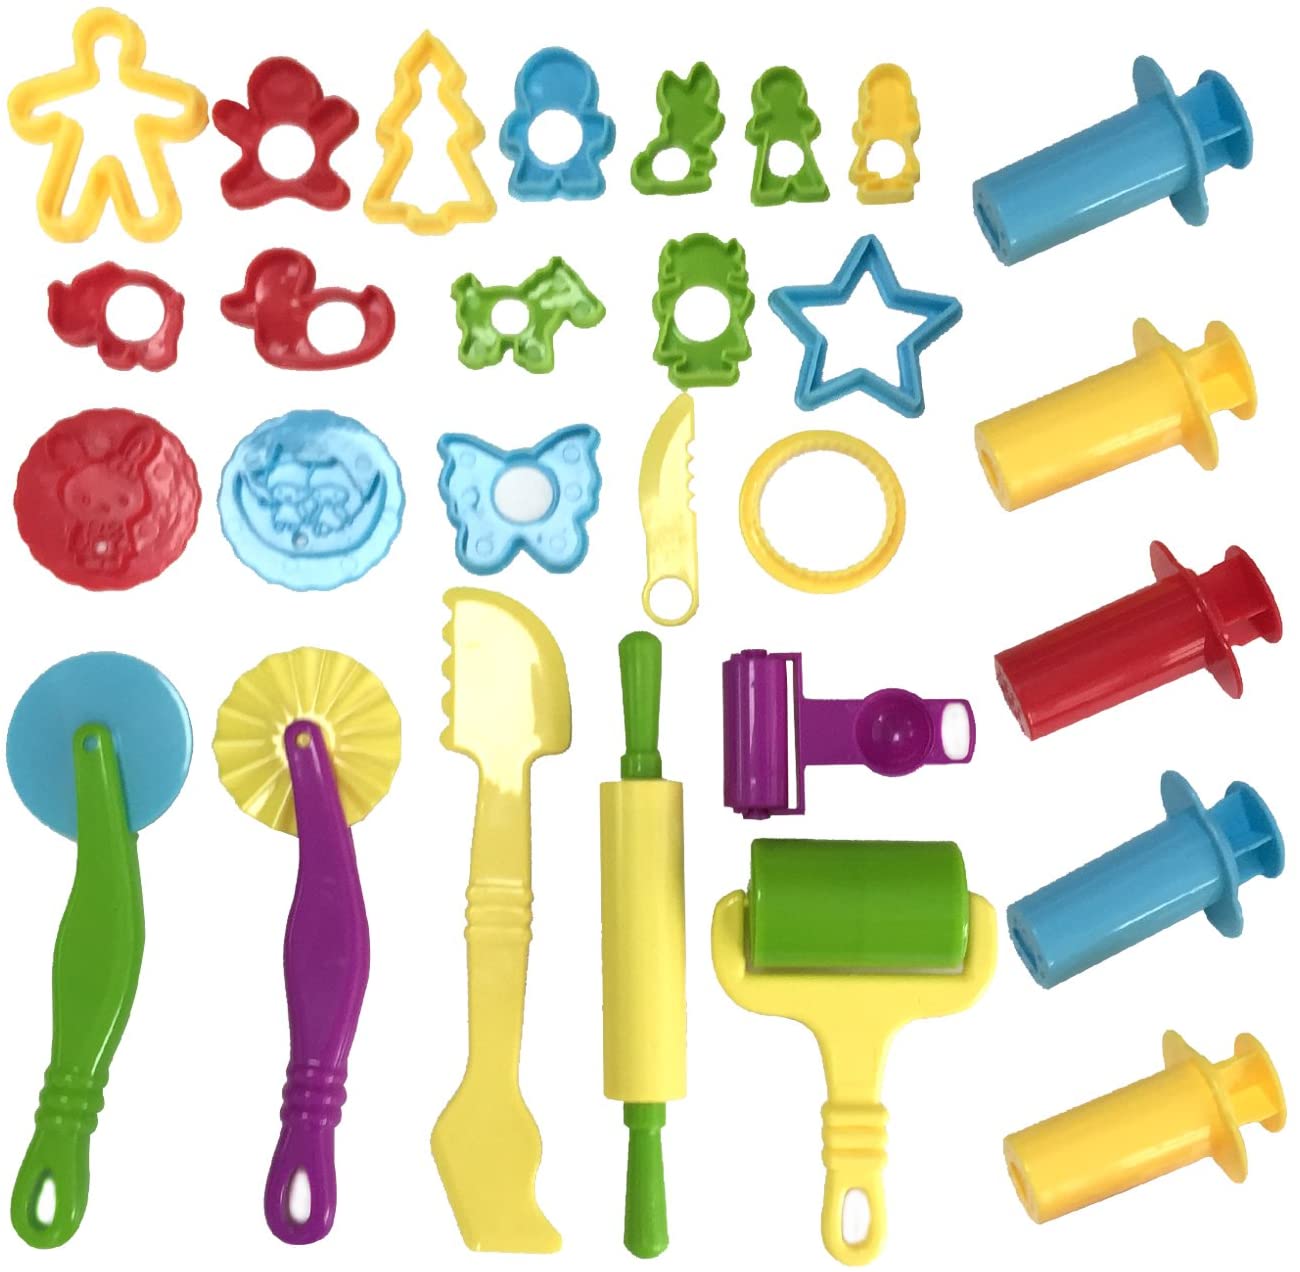 Wartoon Clay and Dough Tools with Models and Molds, Play Dough